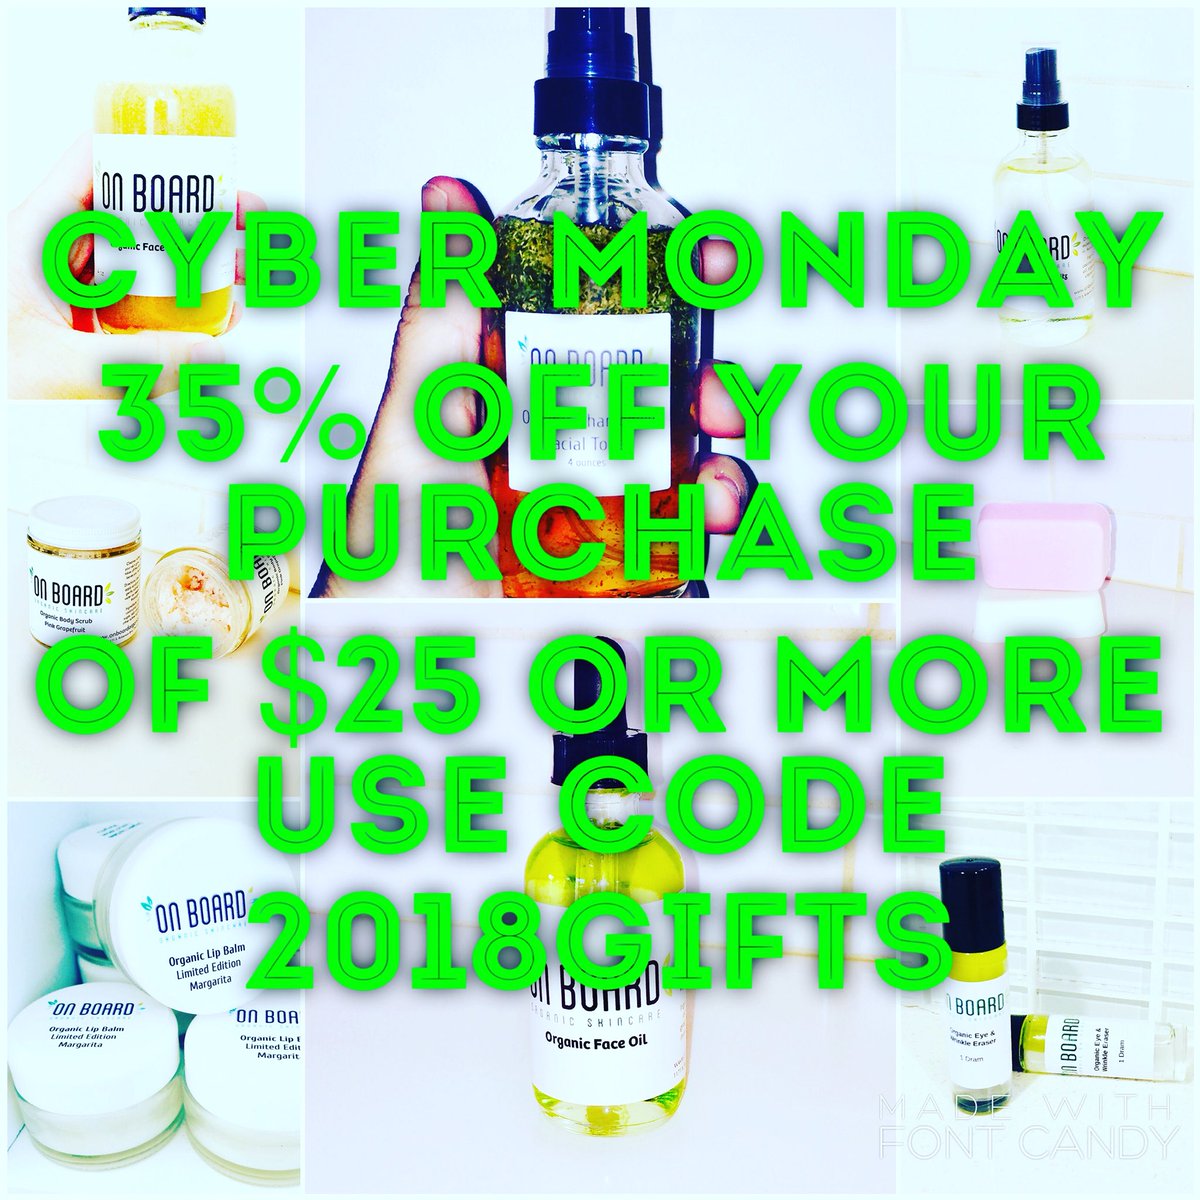 #On Board is #gifting you a #deal this #cybermonday.#fillyourstocking this #holidayseason with #organic #smallbatch #limitedingredient #skincare. #madeinlosangeles with #lotsoflove and always offering you complimentary #giftwrap and #freeshipping on all orders over $25